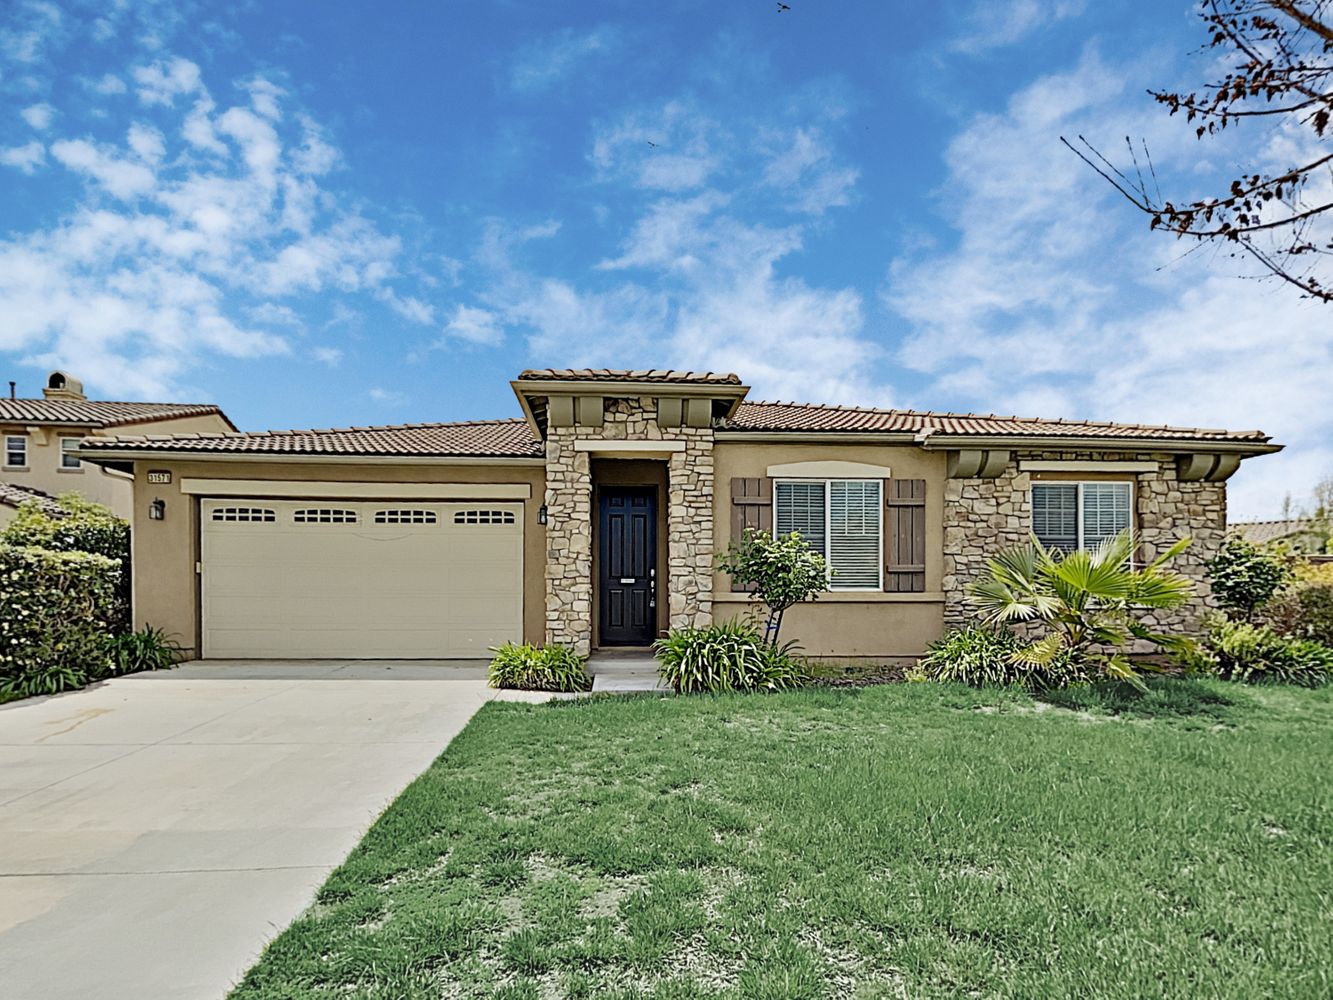 Front of home with two-care garage  at Invitation Homes Southern California.